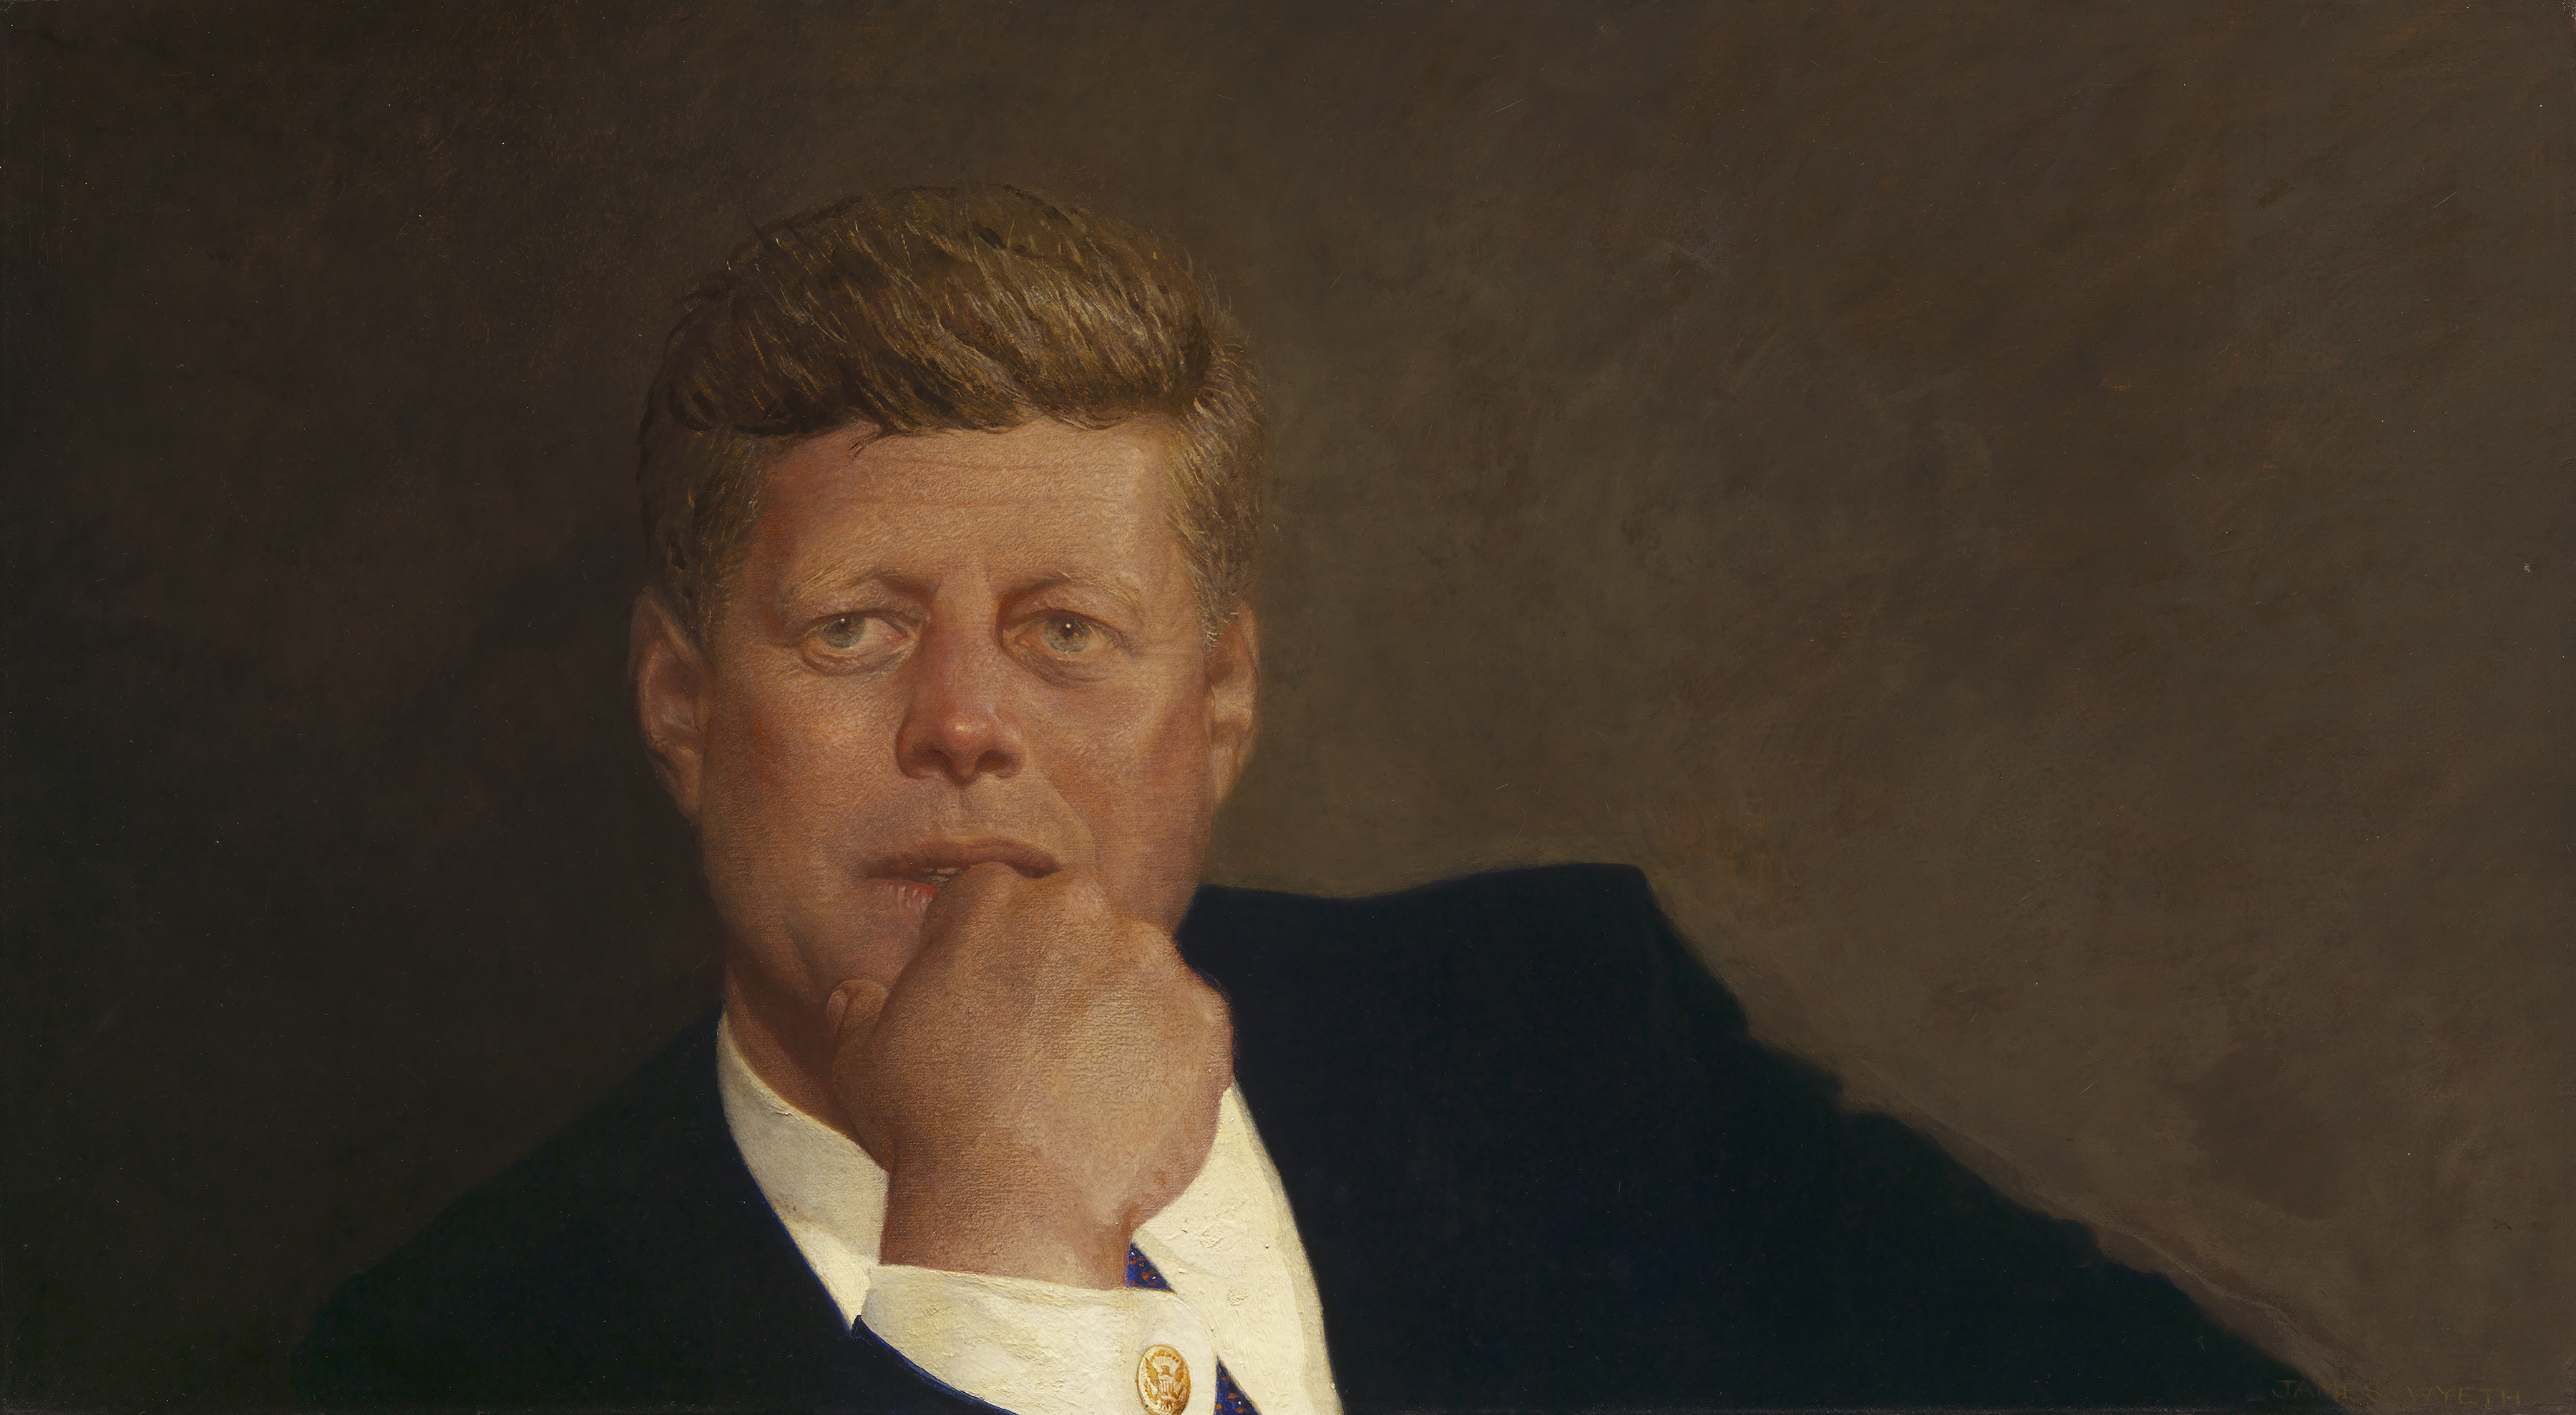 "Portrait of John F. Kennedy" was painted by Jamie Wyeth and completed in 1967.